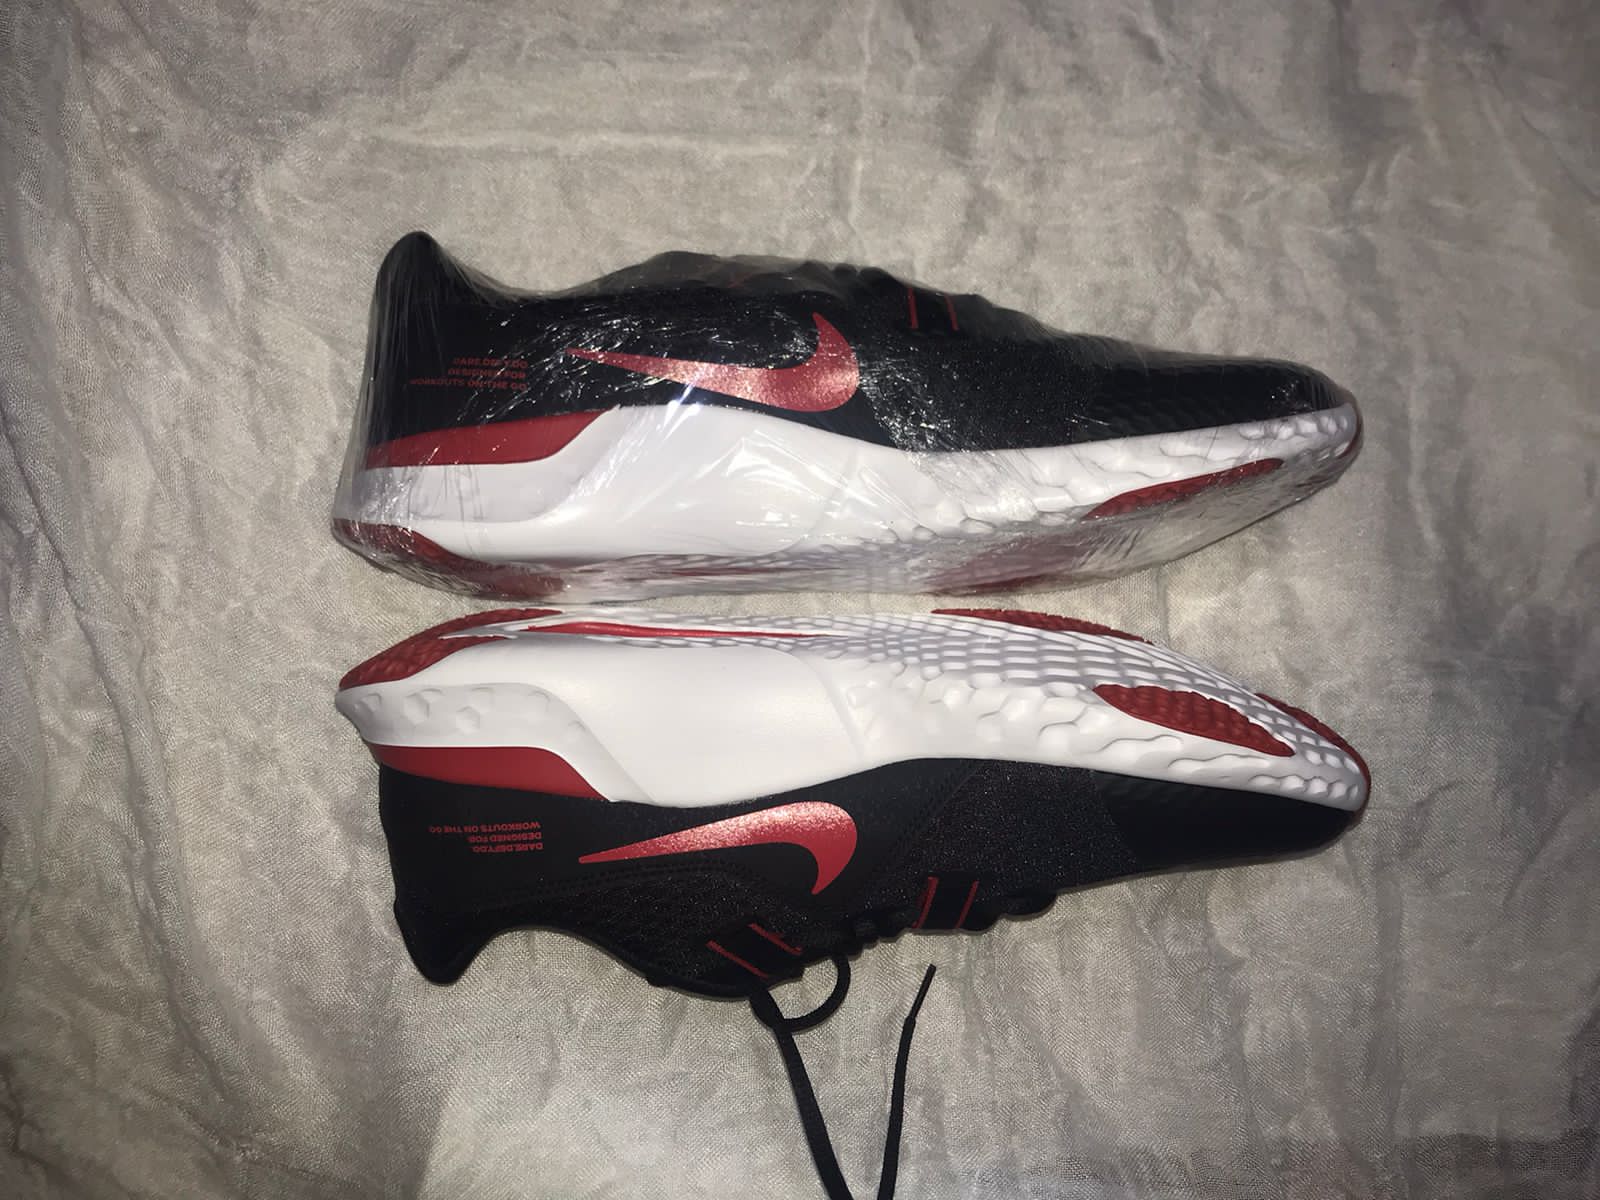 Brand new Nike shoe for sale